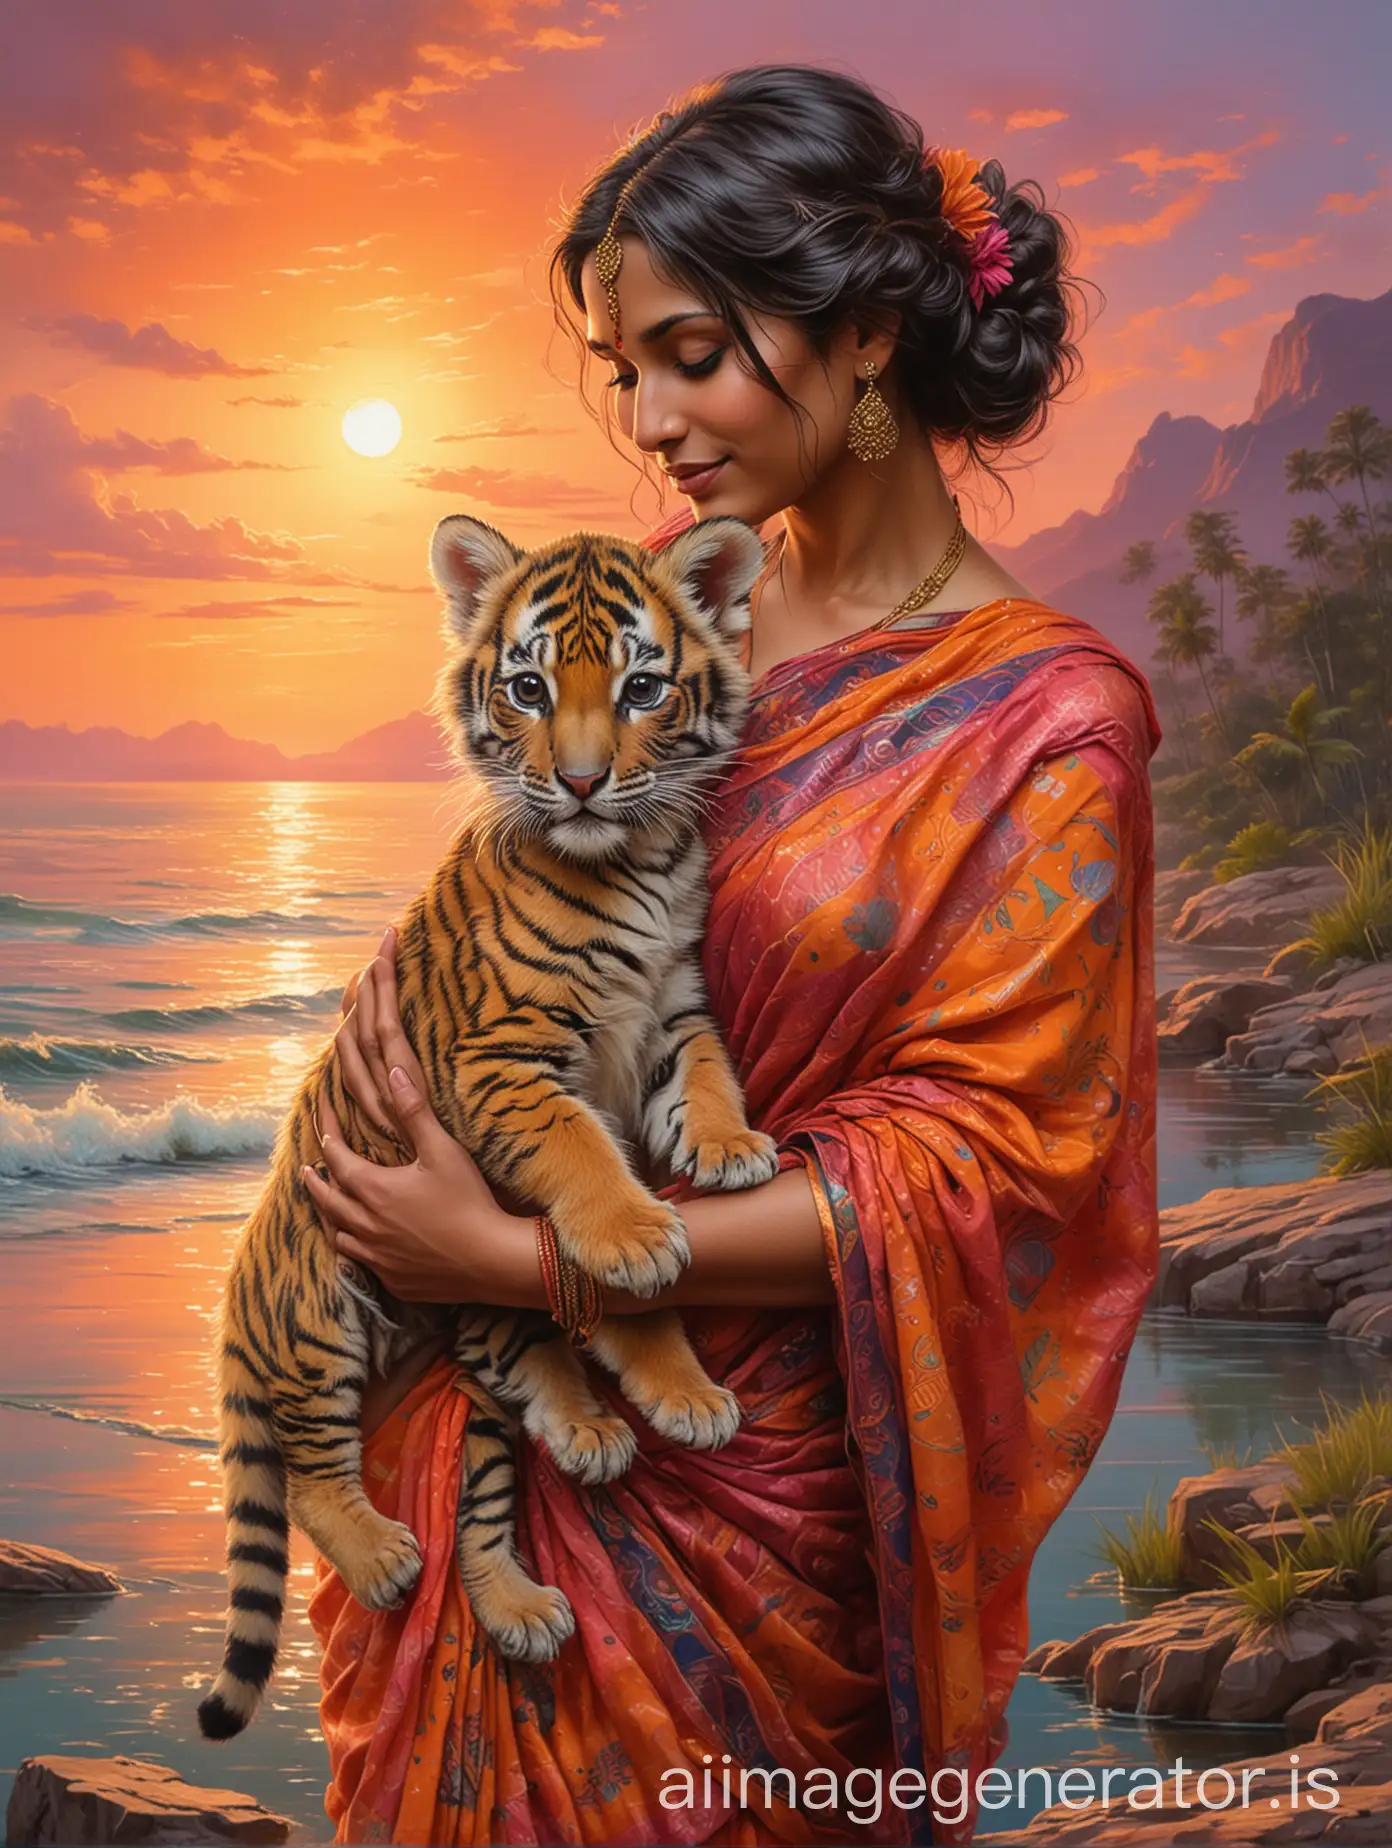 J. Allen St. John art, hindi woman in an intricate vibrant colors sari , woman holding a cute little tiger cub, looking lovingly at the tiger, vibrant sunset waterscape in the background